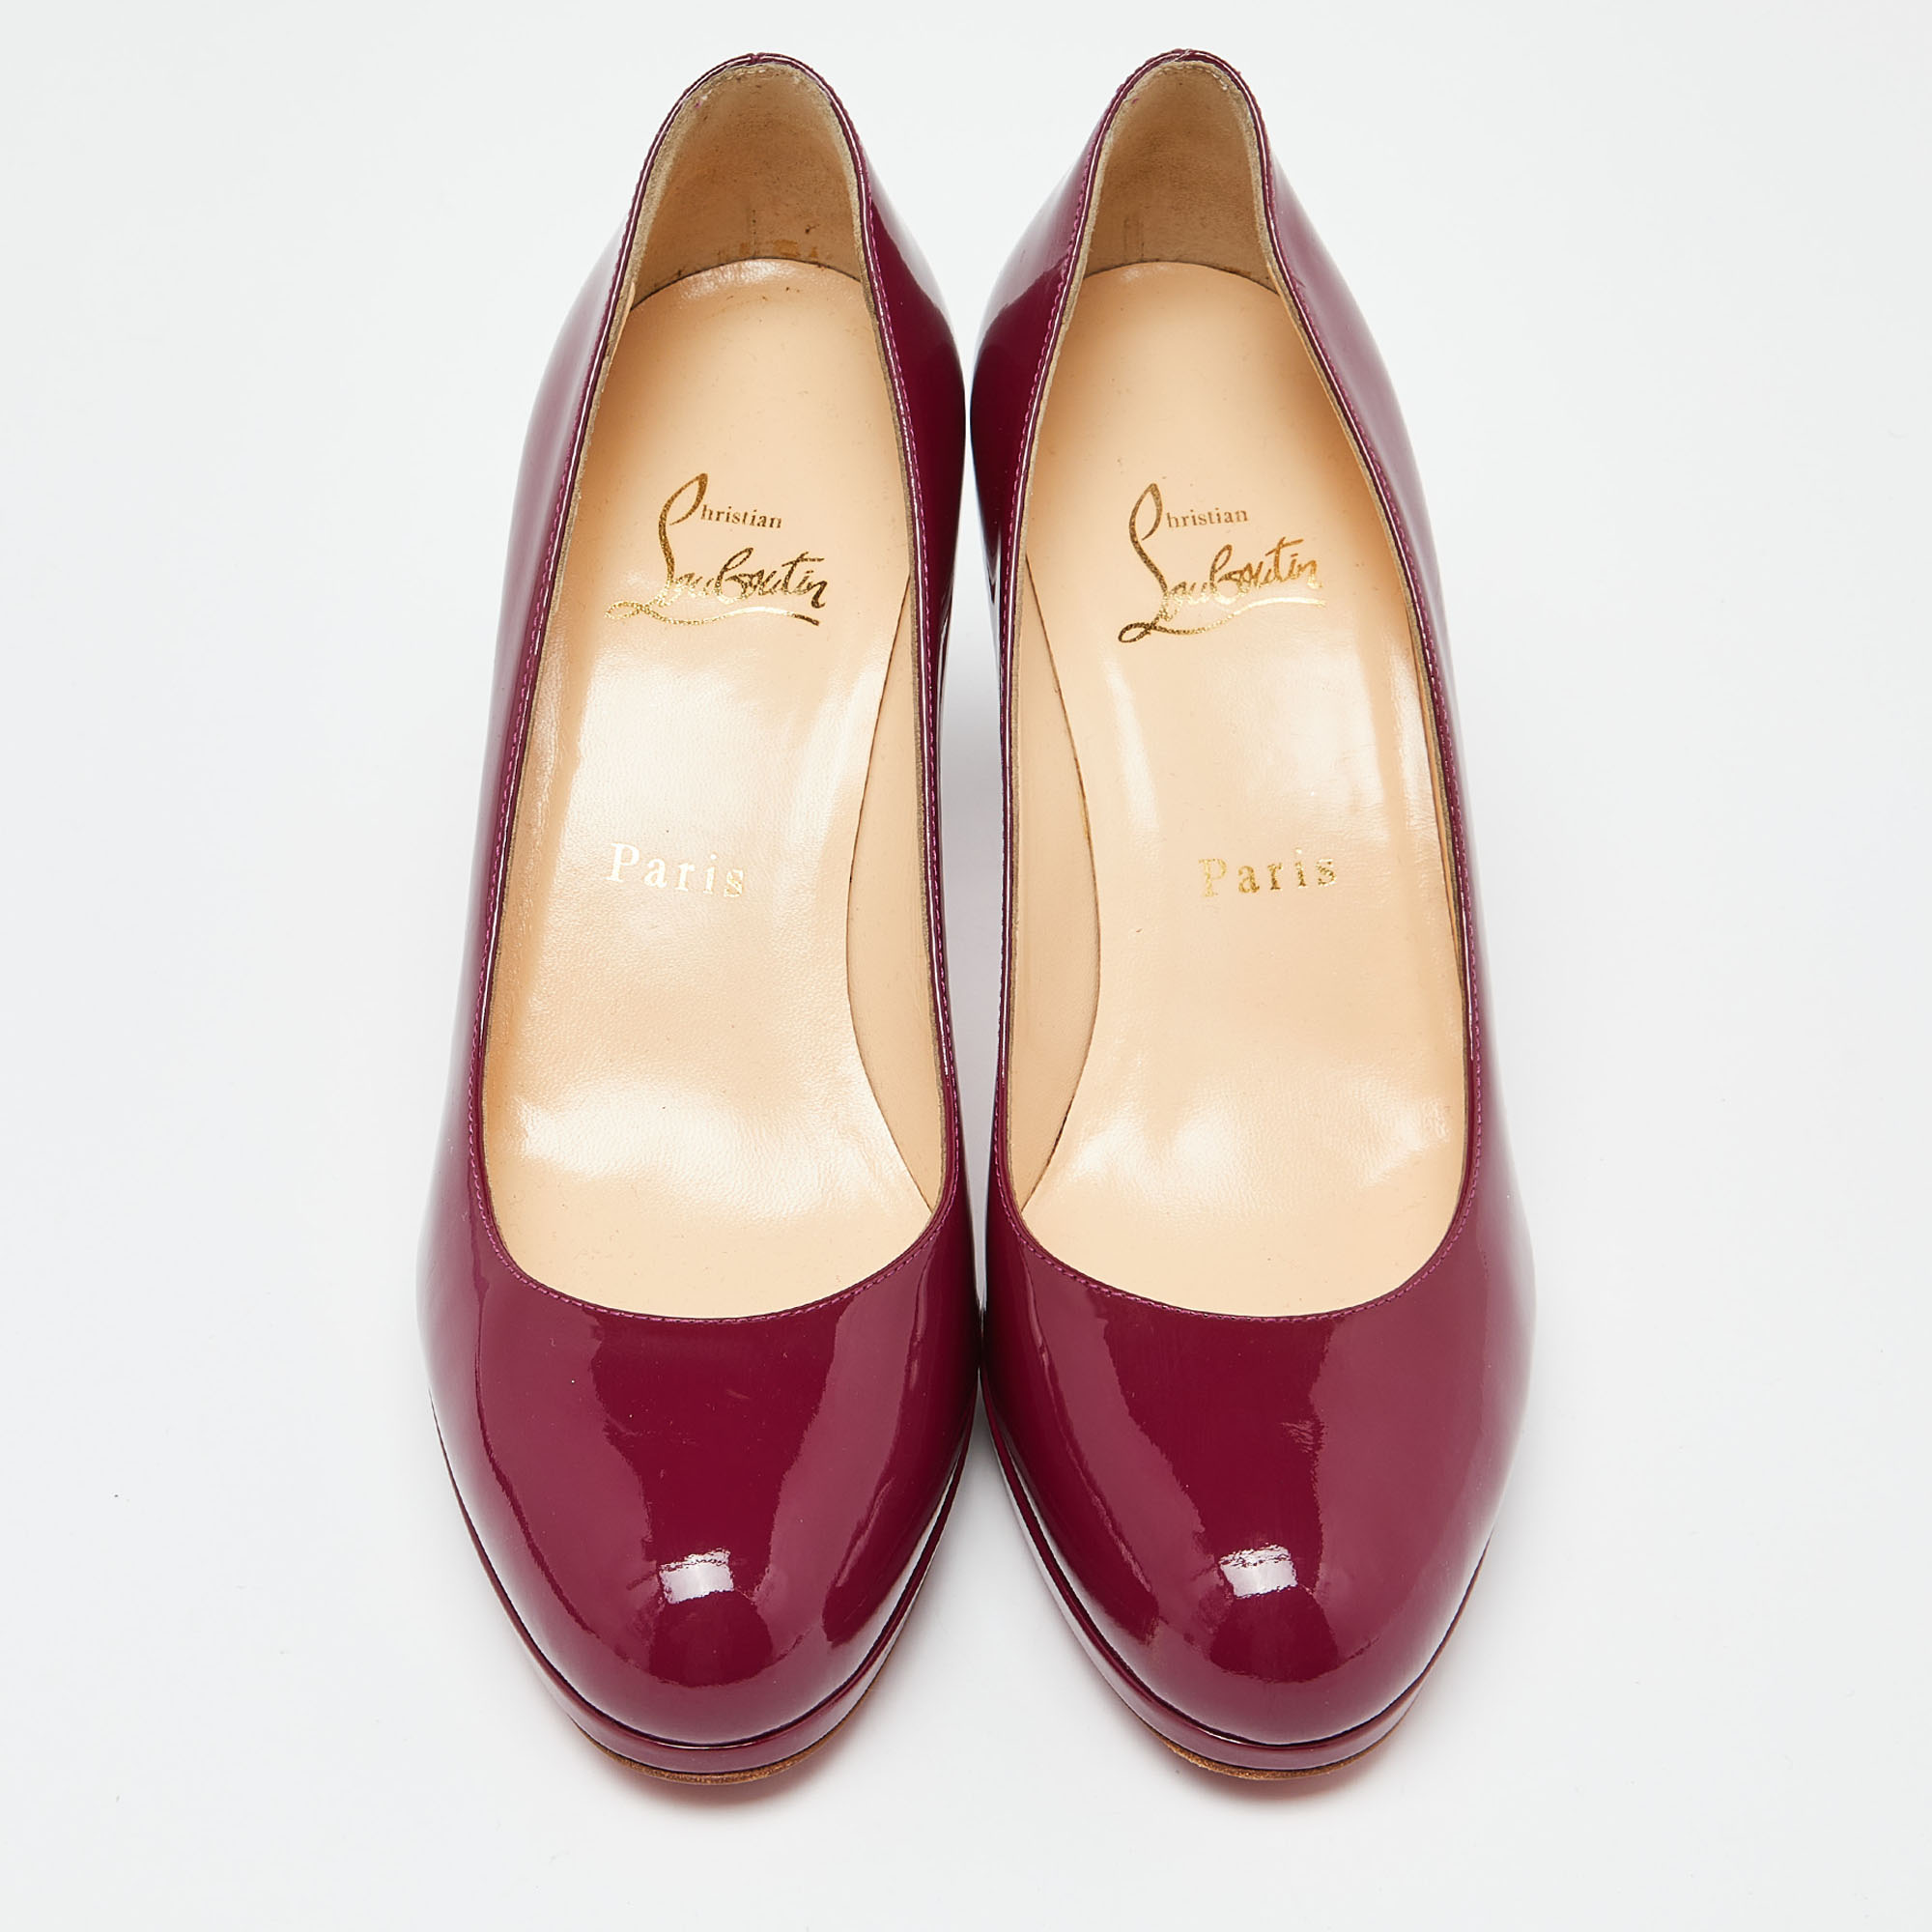 Christian Louboutin Purple Patent Leather New Simple Pumps Size 38